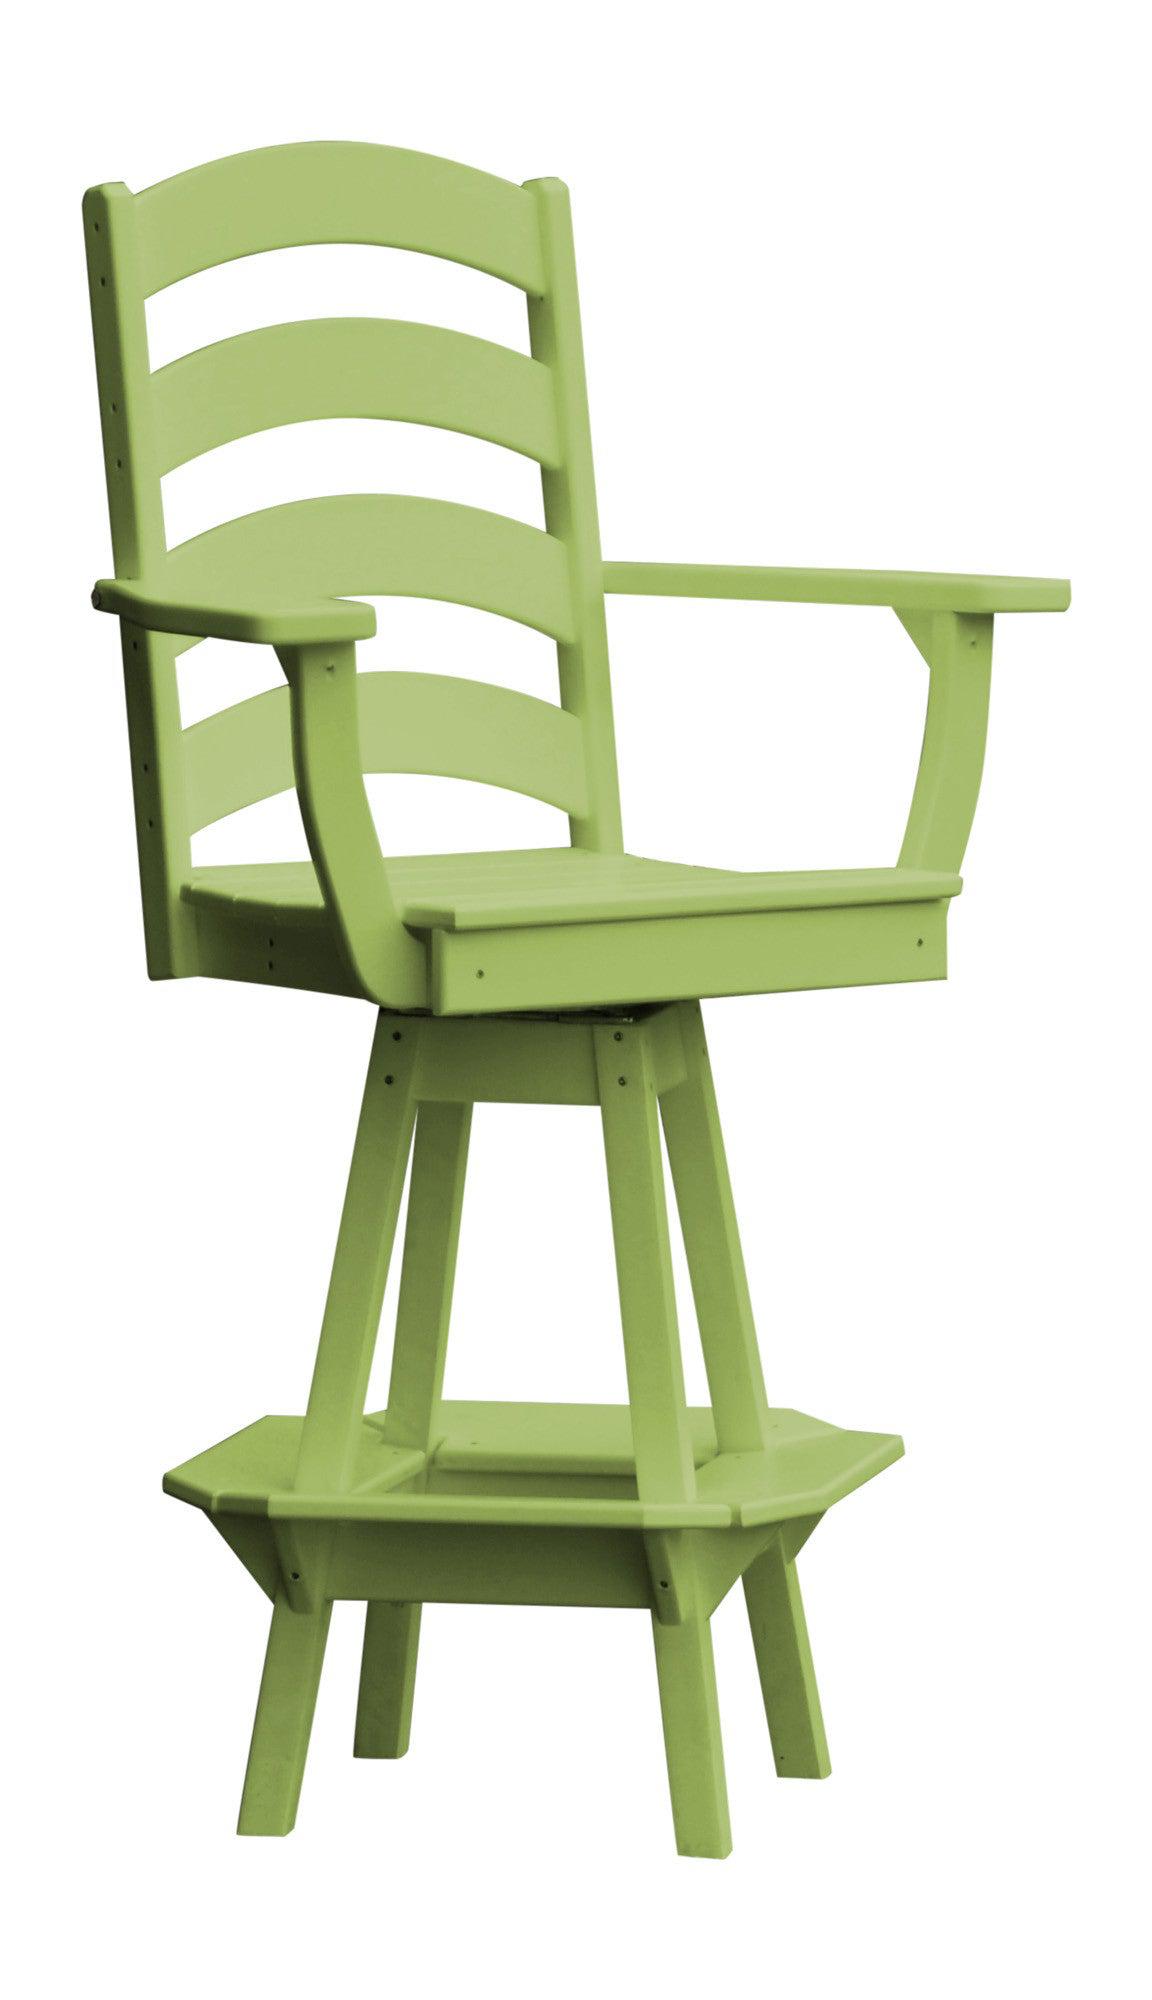 A&L Furniture Recycled Plastic Ladderback Swivel Bar Chair with Arms - Tropical Lime